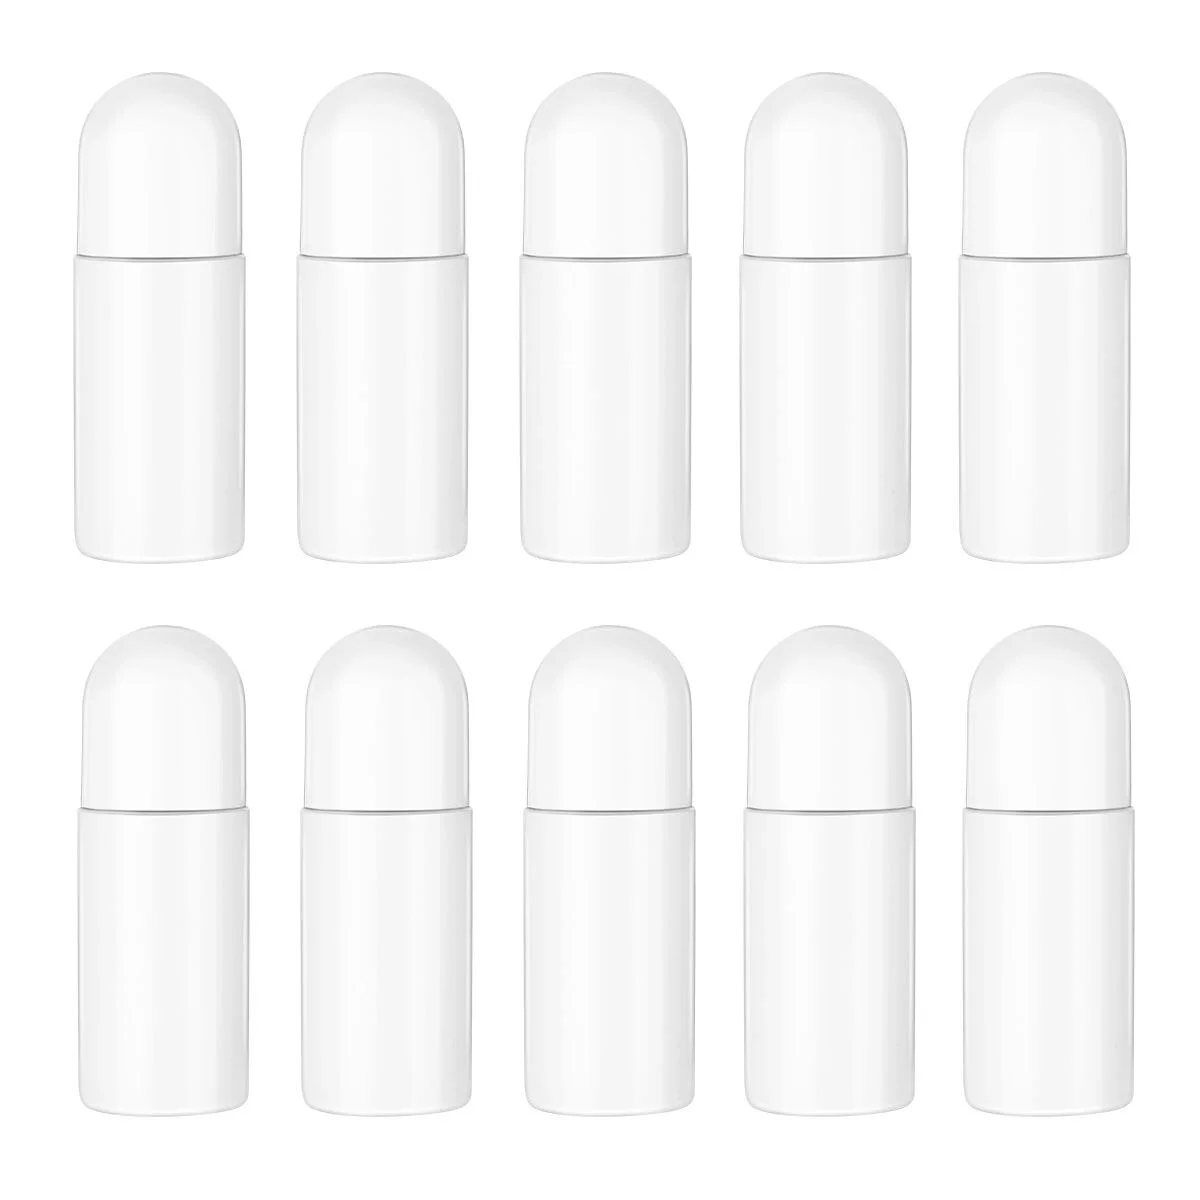 

healifty 10pcs 50ML Plastic Leak Proof Containerss for Essential Oils Empty Refillable Roll on Bottles Reusable Leak-Proof DIY